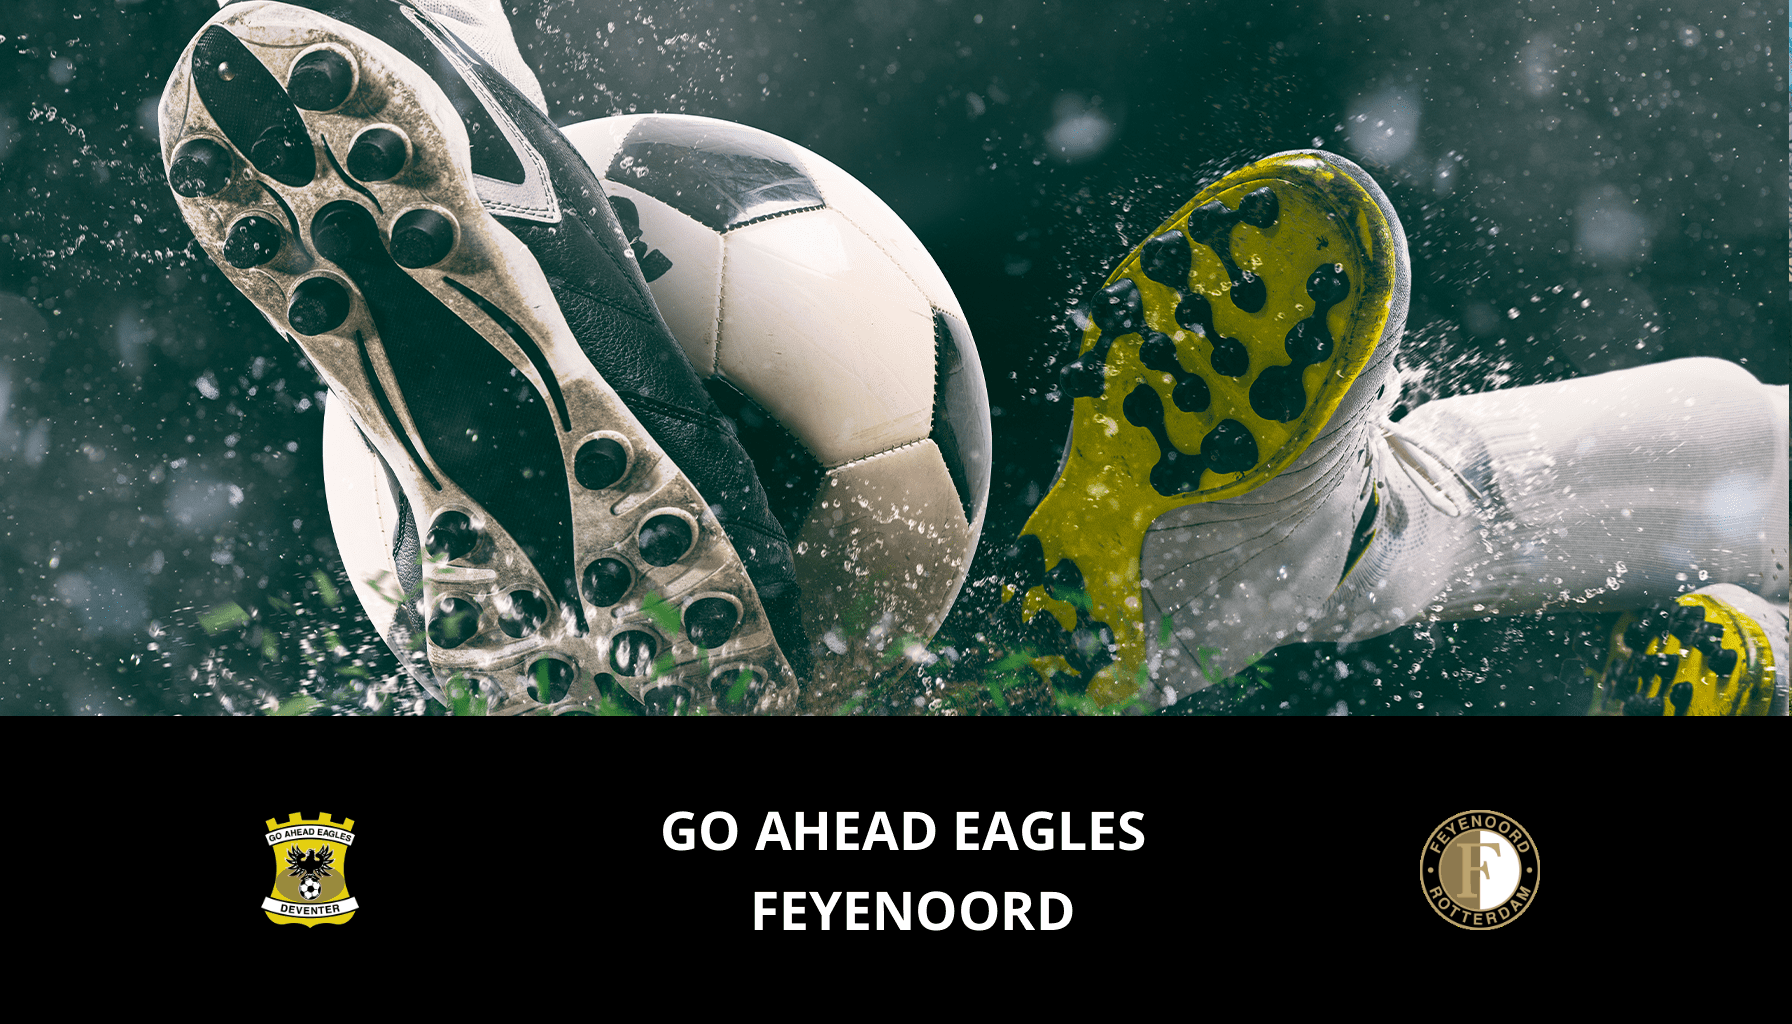 Previsione per GO Ahead Eagles VS Feyenoord il 25/04/2024 Analysis of the match